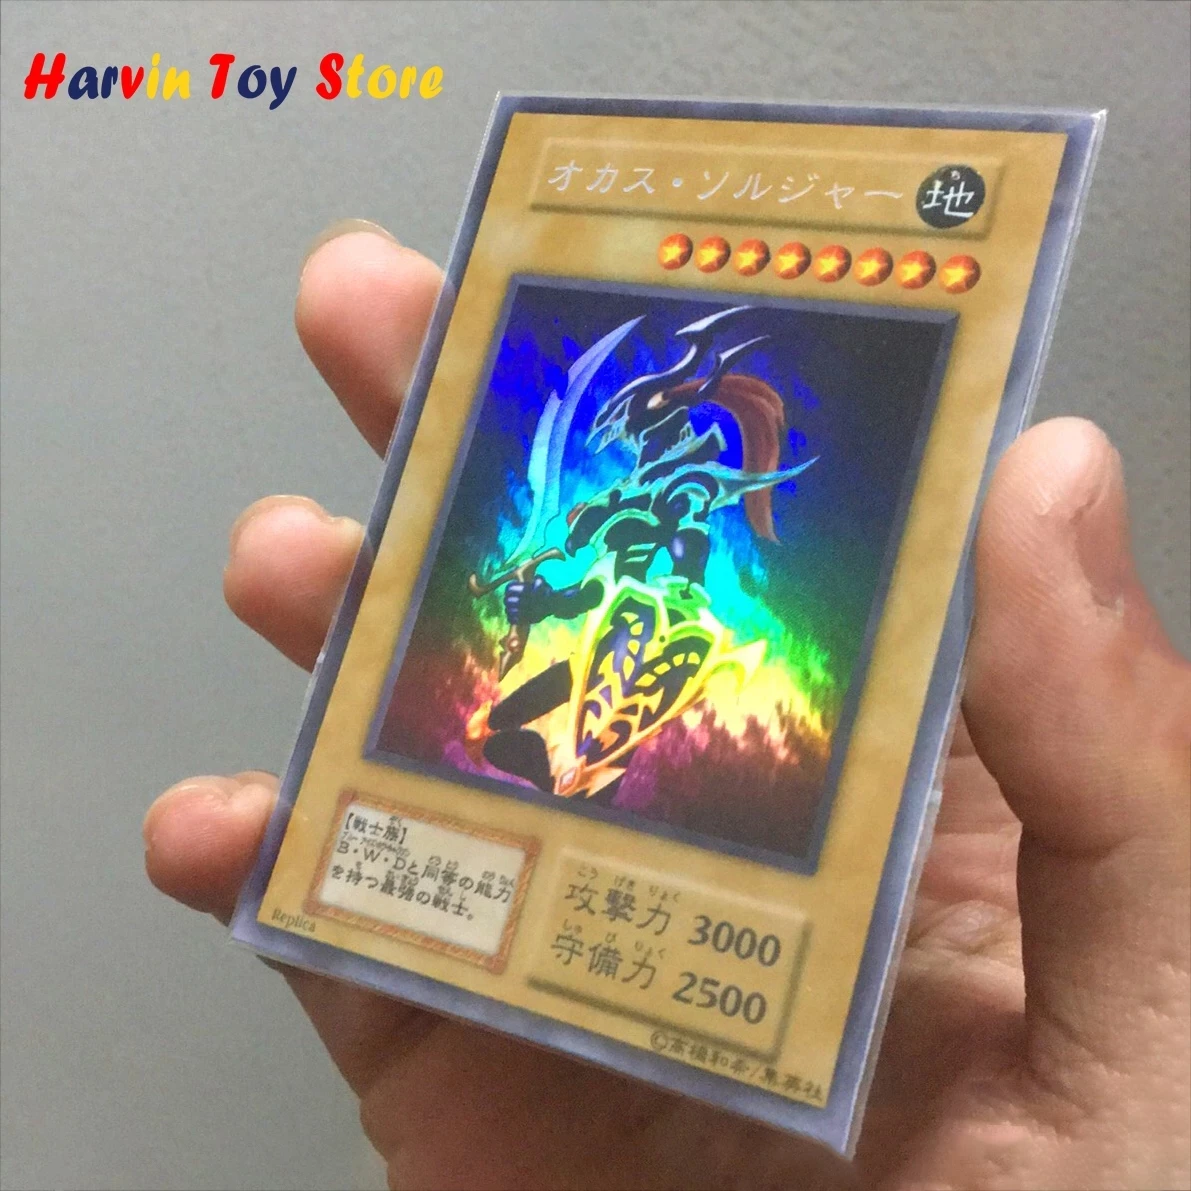 the Chaos Warrior Black Luster Soldier LVP2-JP001 Ultra Japanese Yugioh